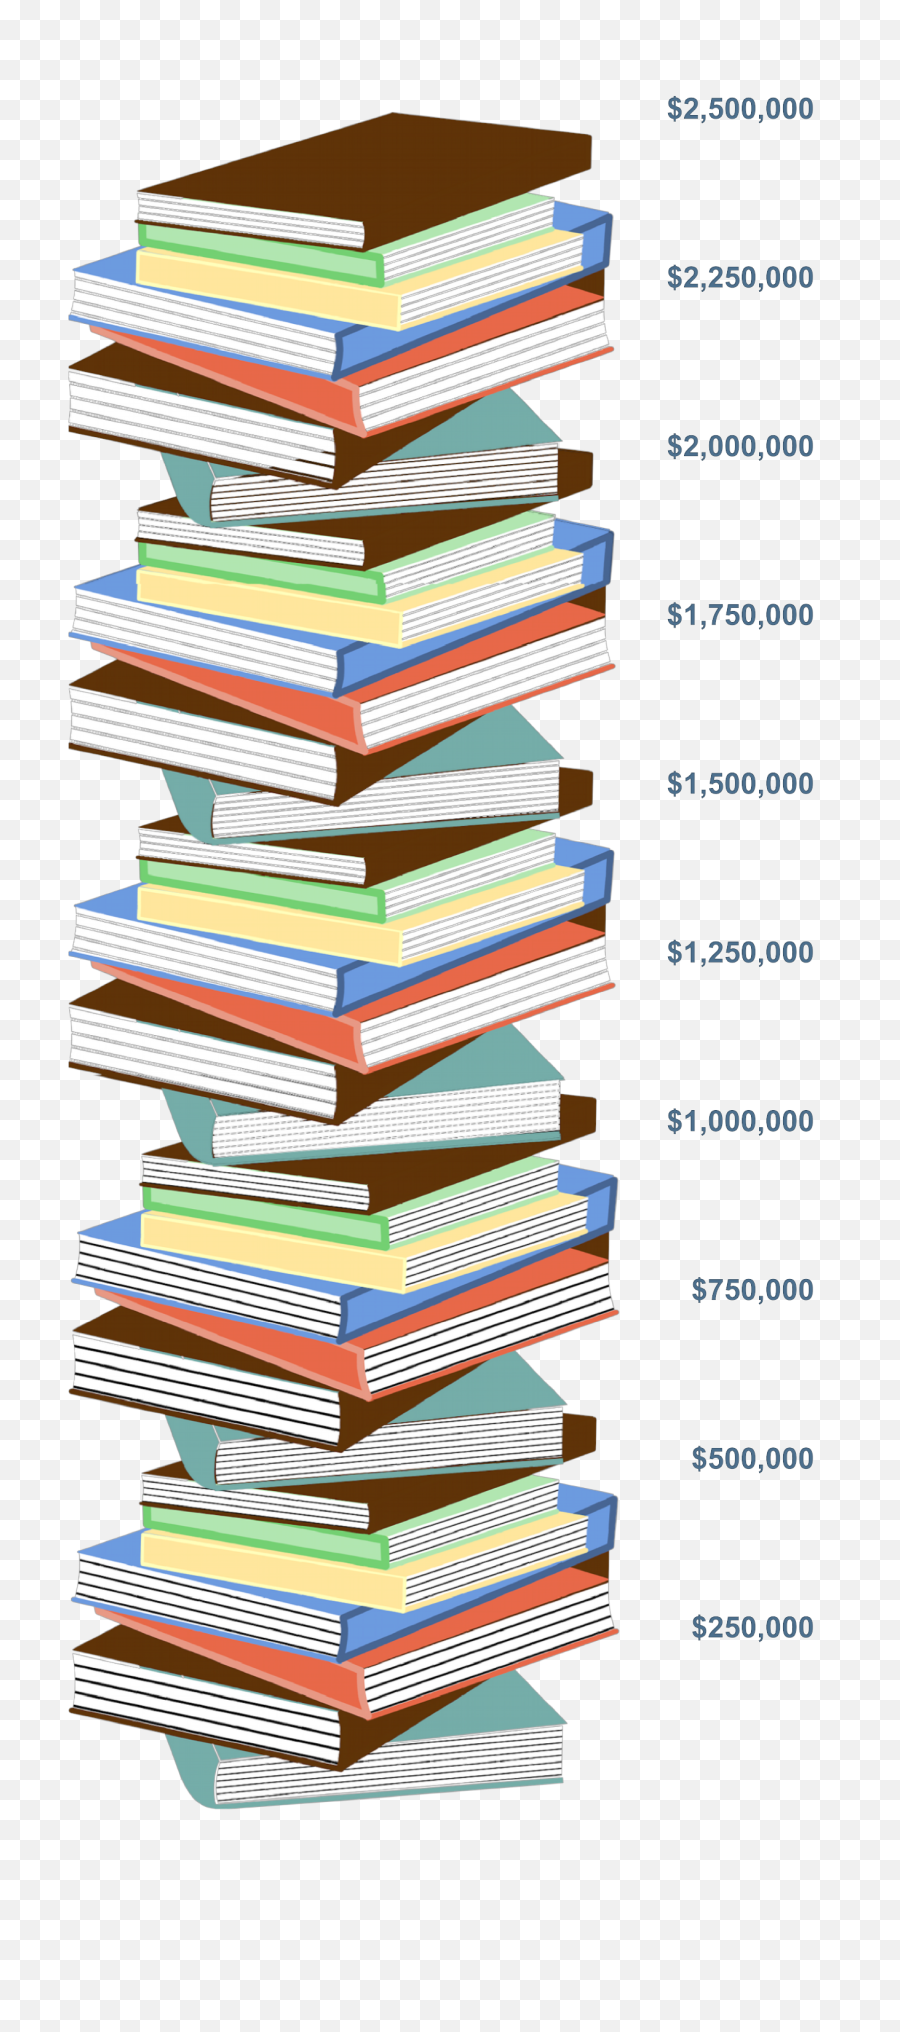 Book Stack Png - Book Stack Image Showing 2476300 Raised Transparent Background Stack Of Books Clipart,Book Clipart Png